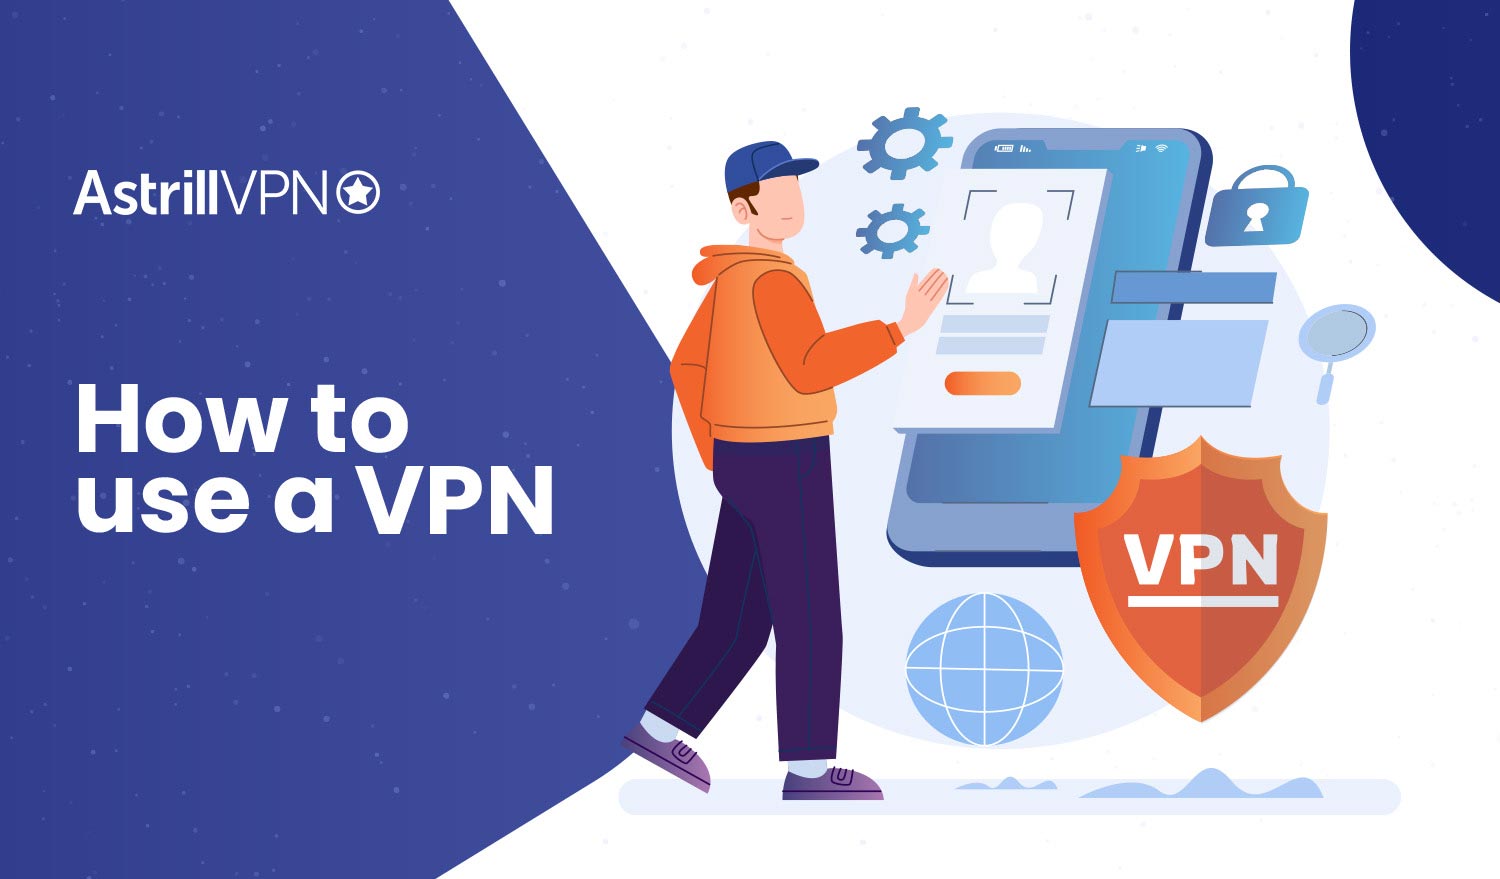 How to Change your IP Address - AstrillVPN Blog